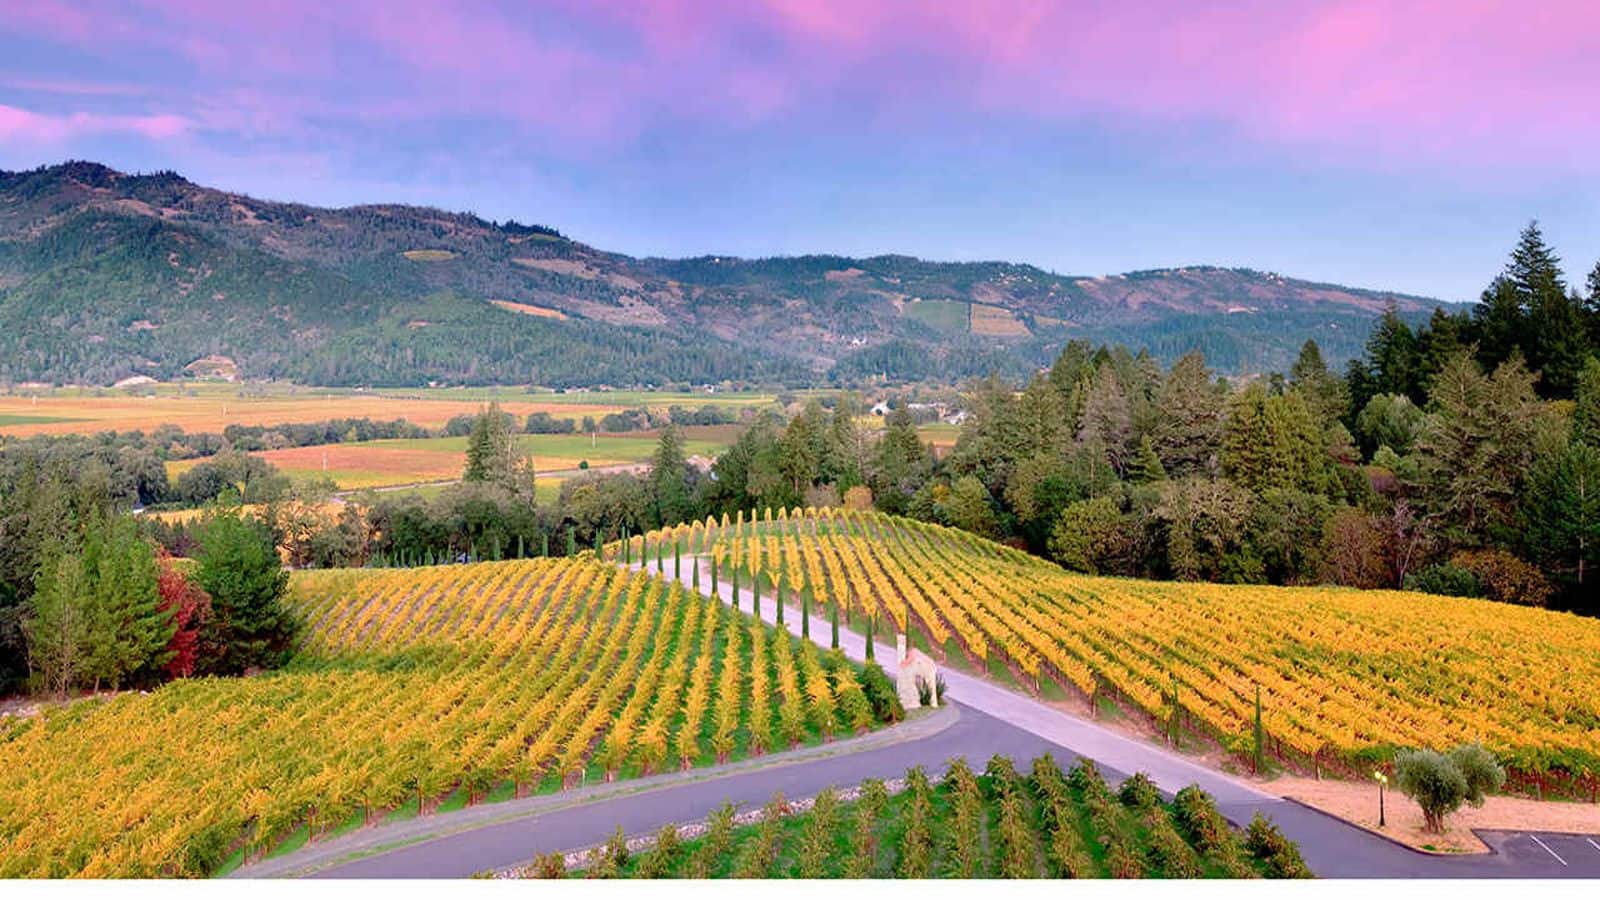 Unwind at Napa Valley's scenic vineyards and culture